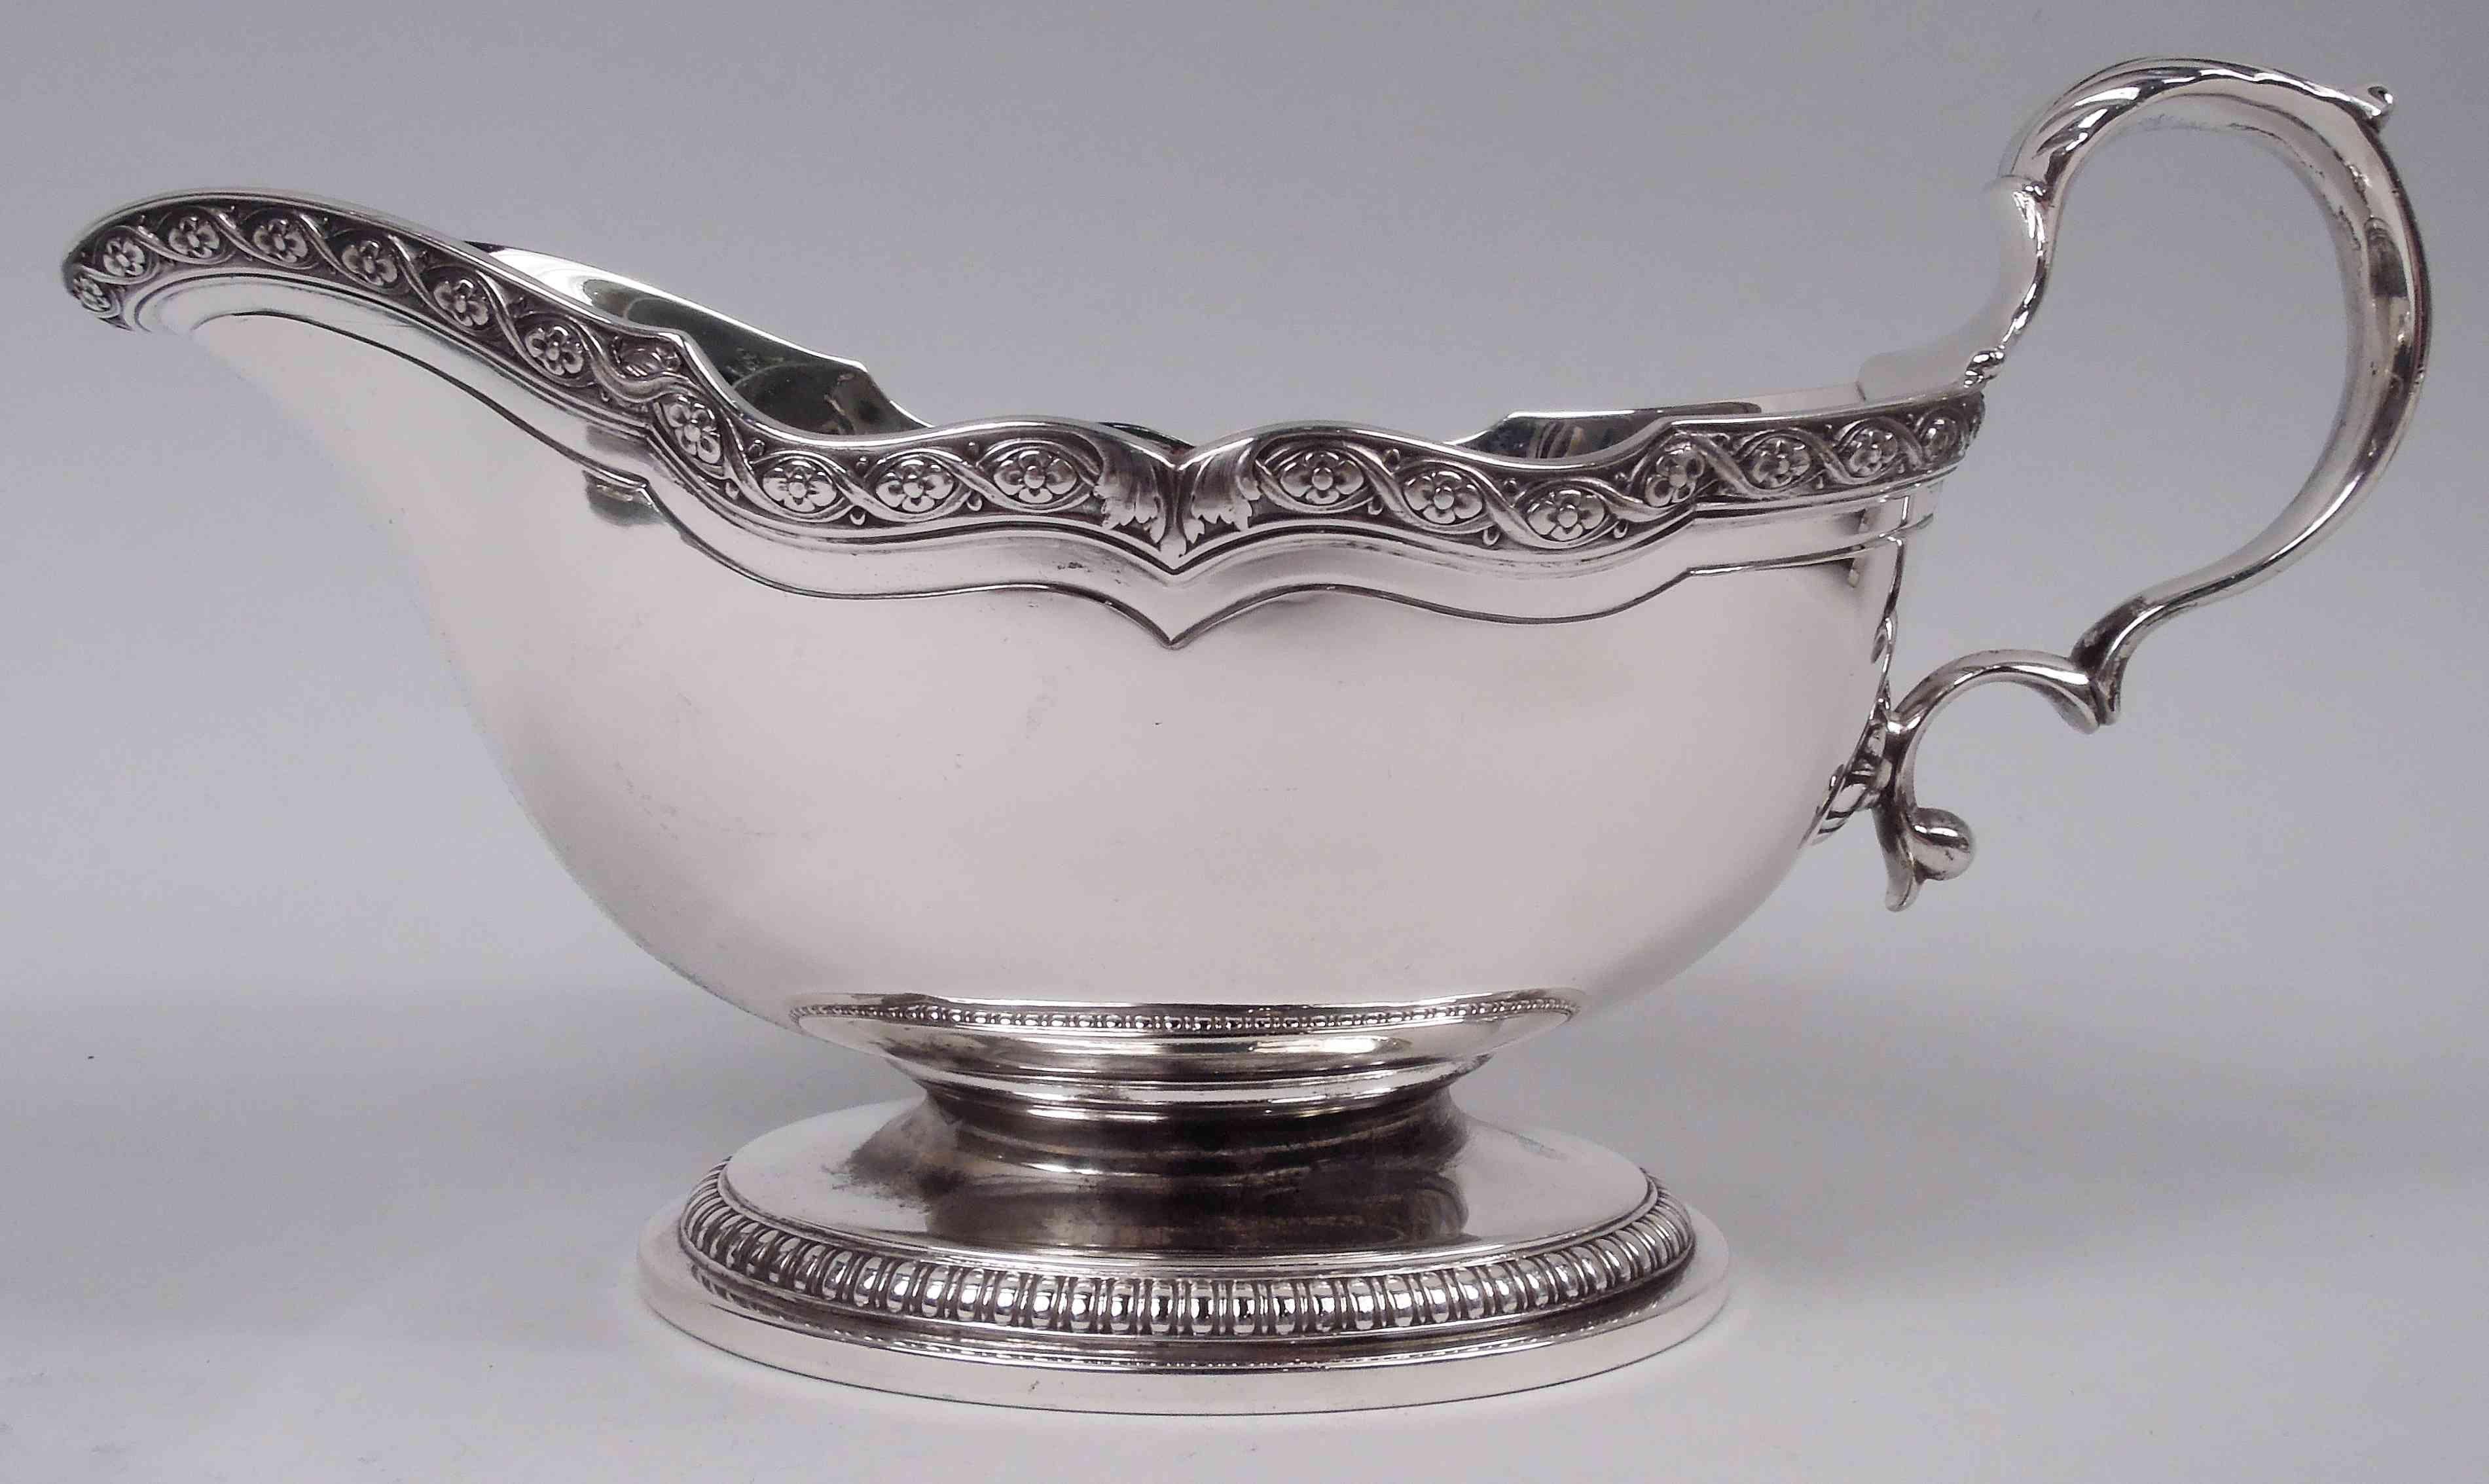 Tiffany Edwardian Classical Sterling Silver Gravy Boat on Stand For Sale 3